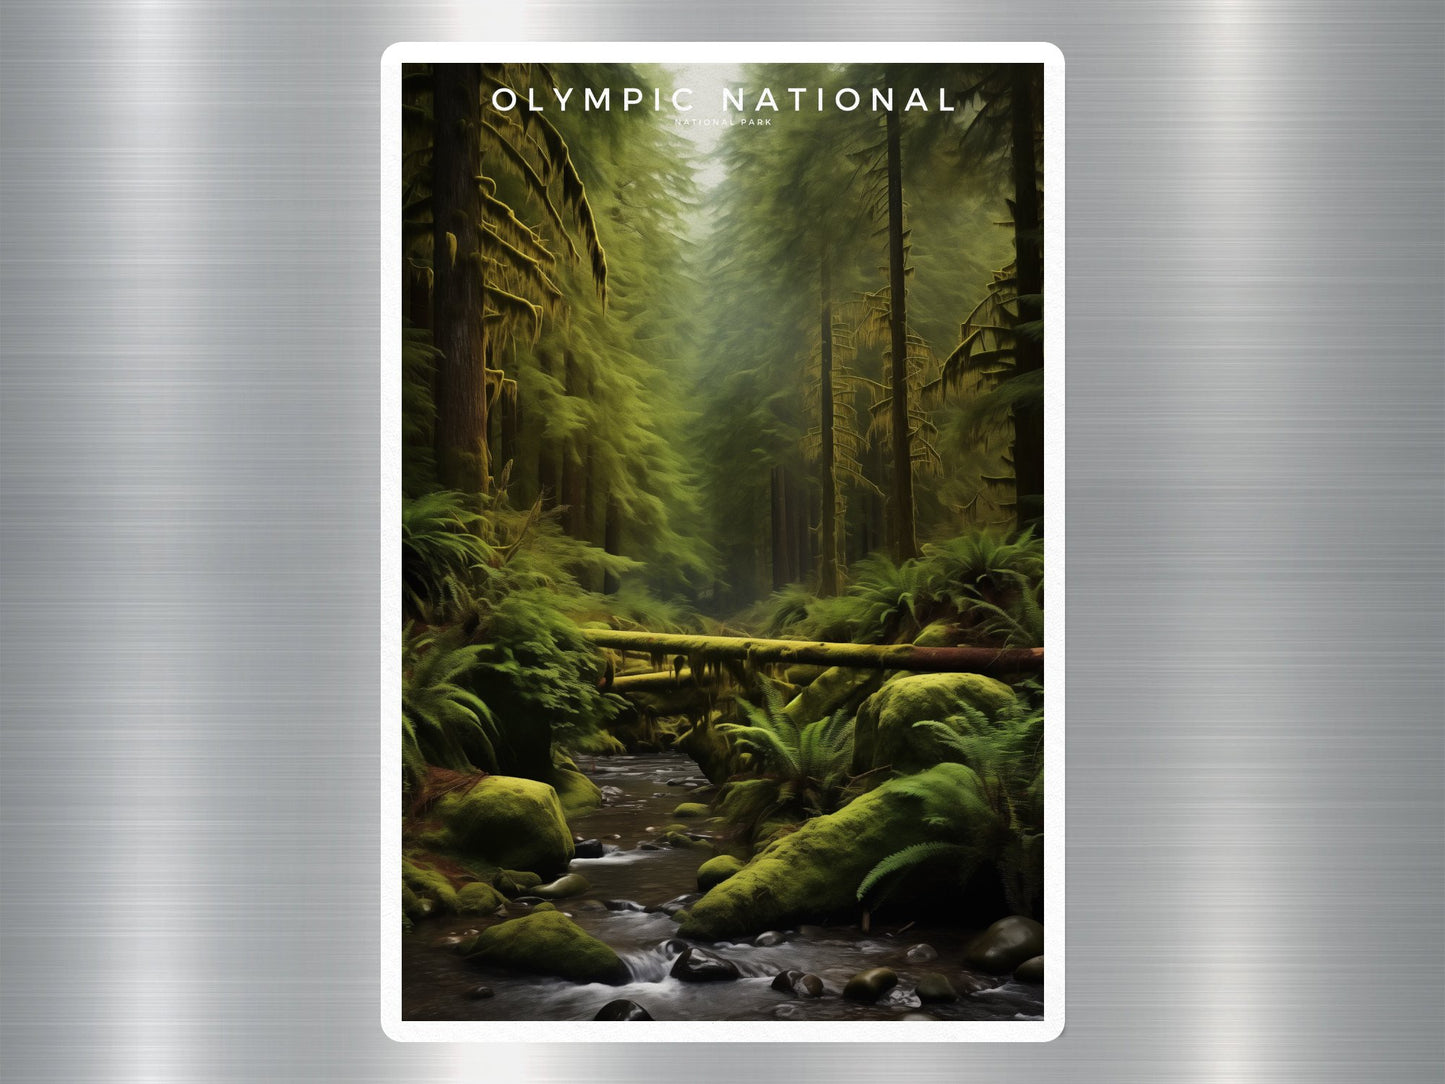 Olympic National National Park Sticker